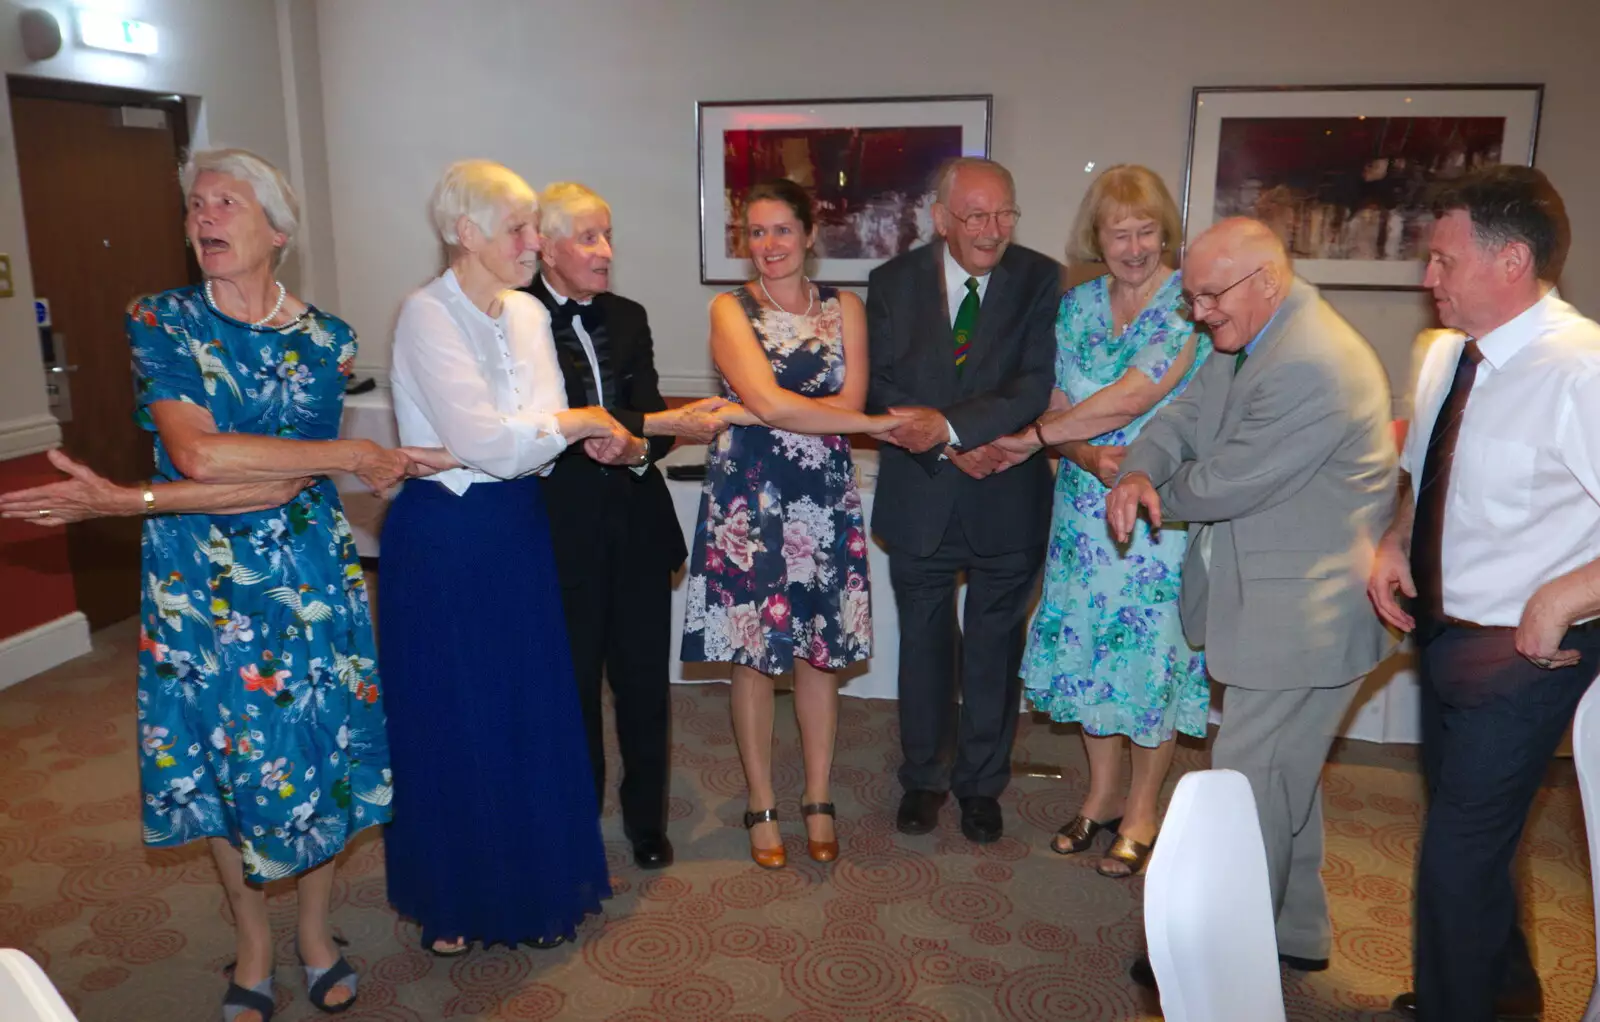 Auld Lang Syne occurs, from Kenilworth Castle and the 69th Entry Reunion Dinner, Stratford, Warwickshire - 14th September 2019